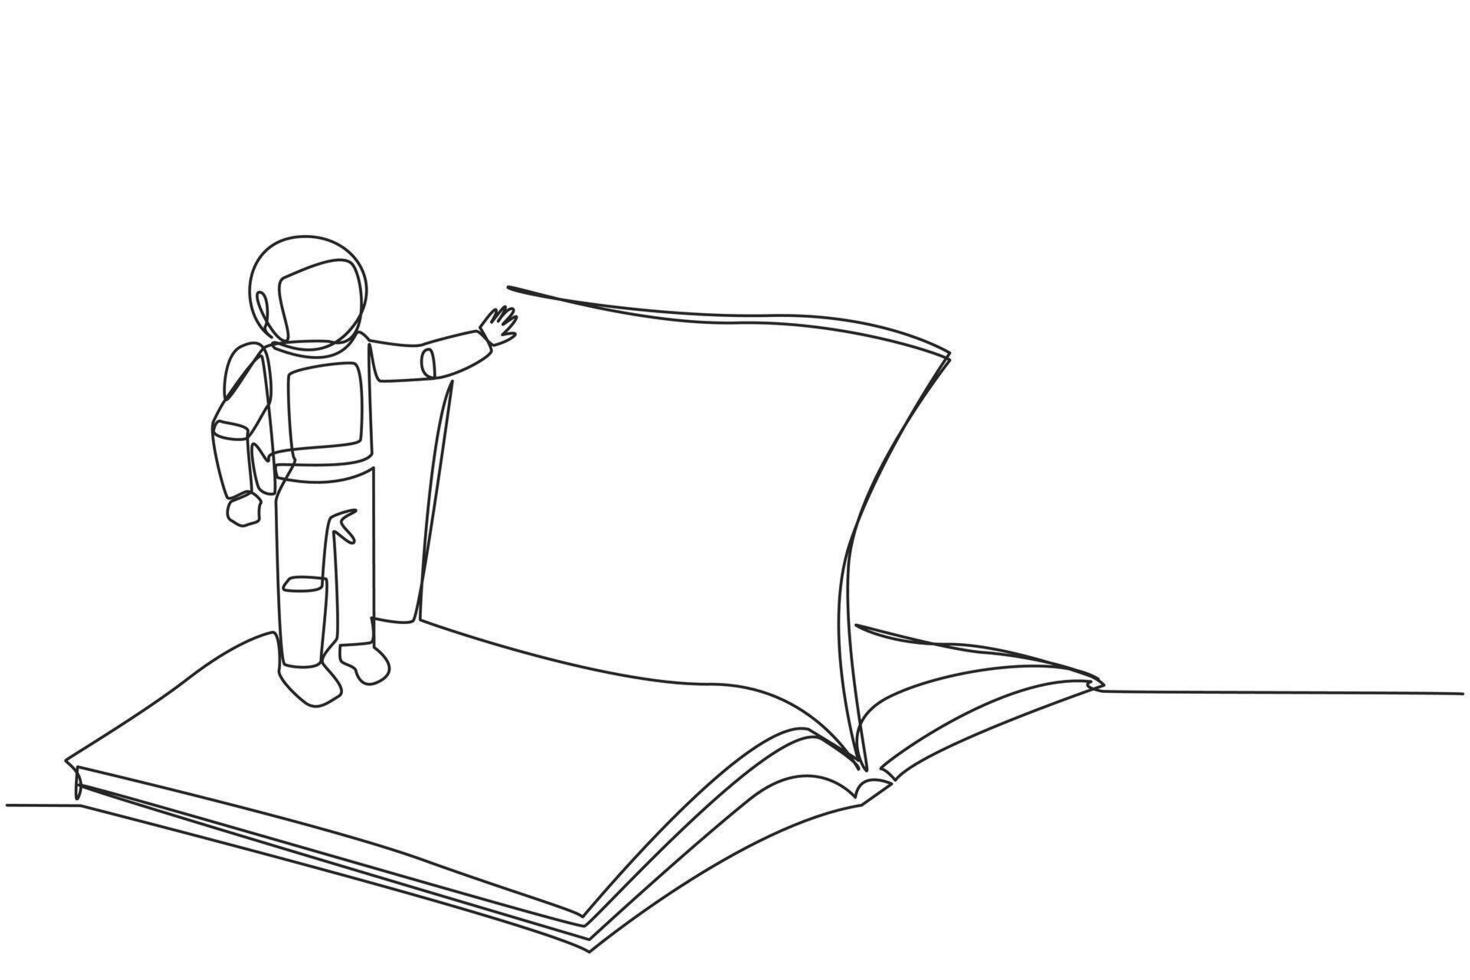 Continuous one line drawing astronaut standing over open ledger turning page. Read slowly to understand contents of each page. Reading increases insight. Single line draw design illustration vector